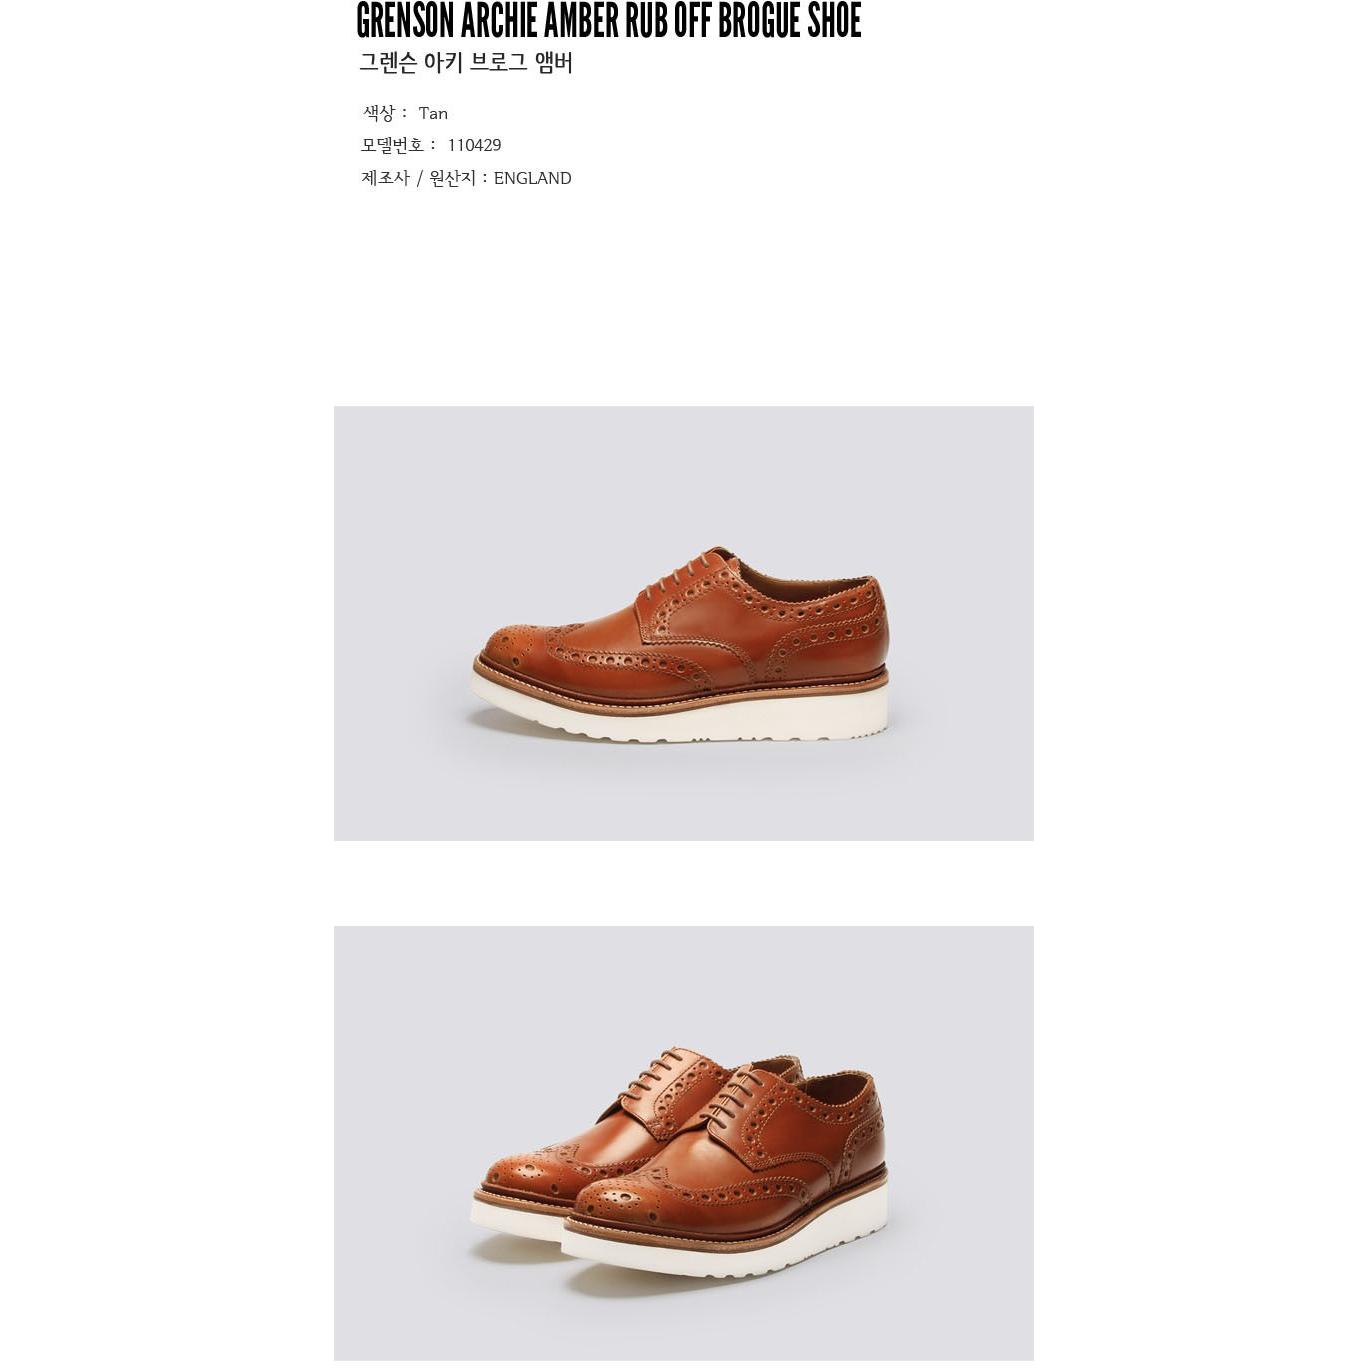 GRENSON ARCHIE AMBER RUB OFF BROGUE SHOE in Tan.